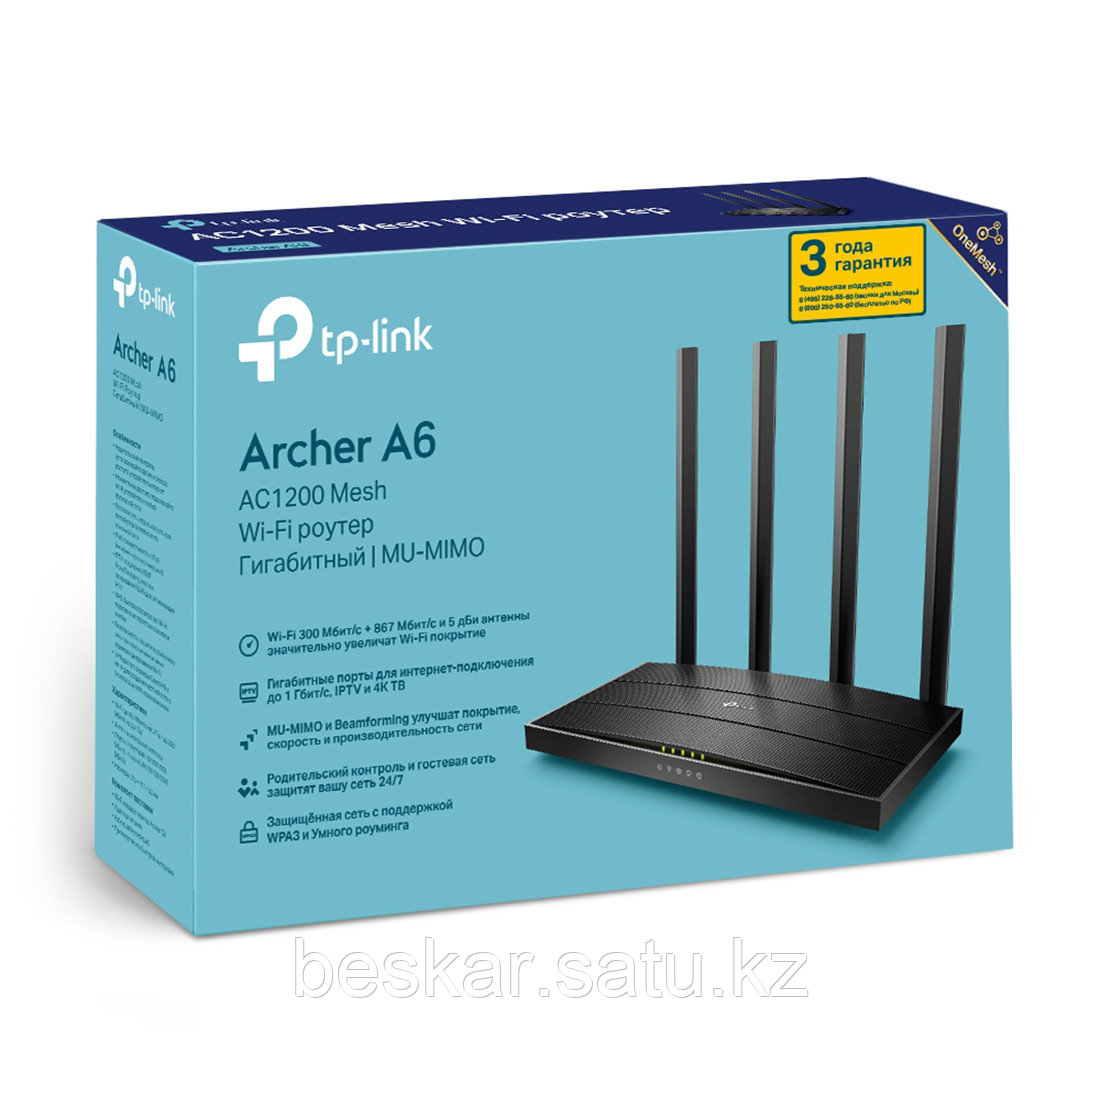 Маршрутизатор TP-Link Archer A6 - фото 3 - id-p108240982